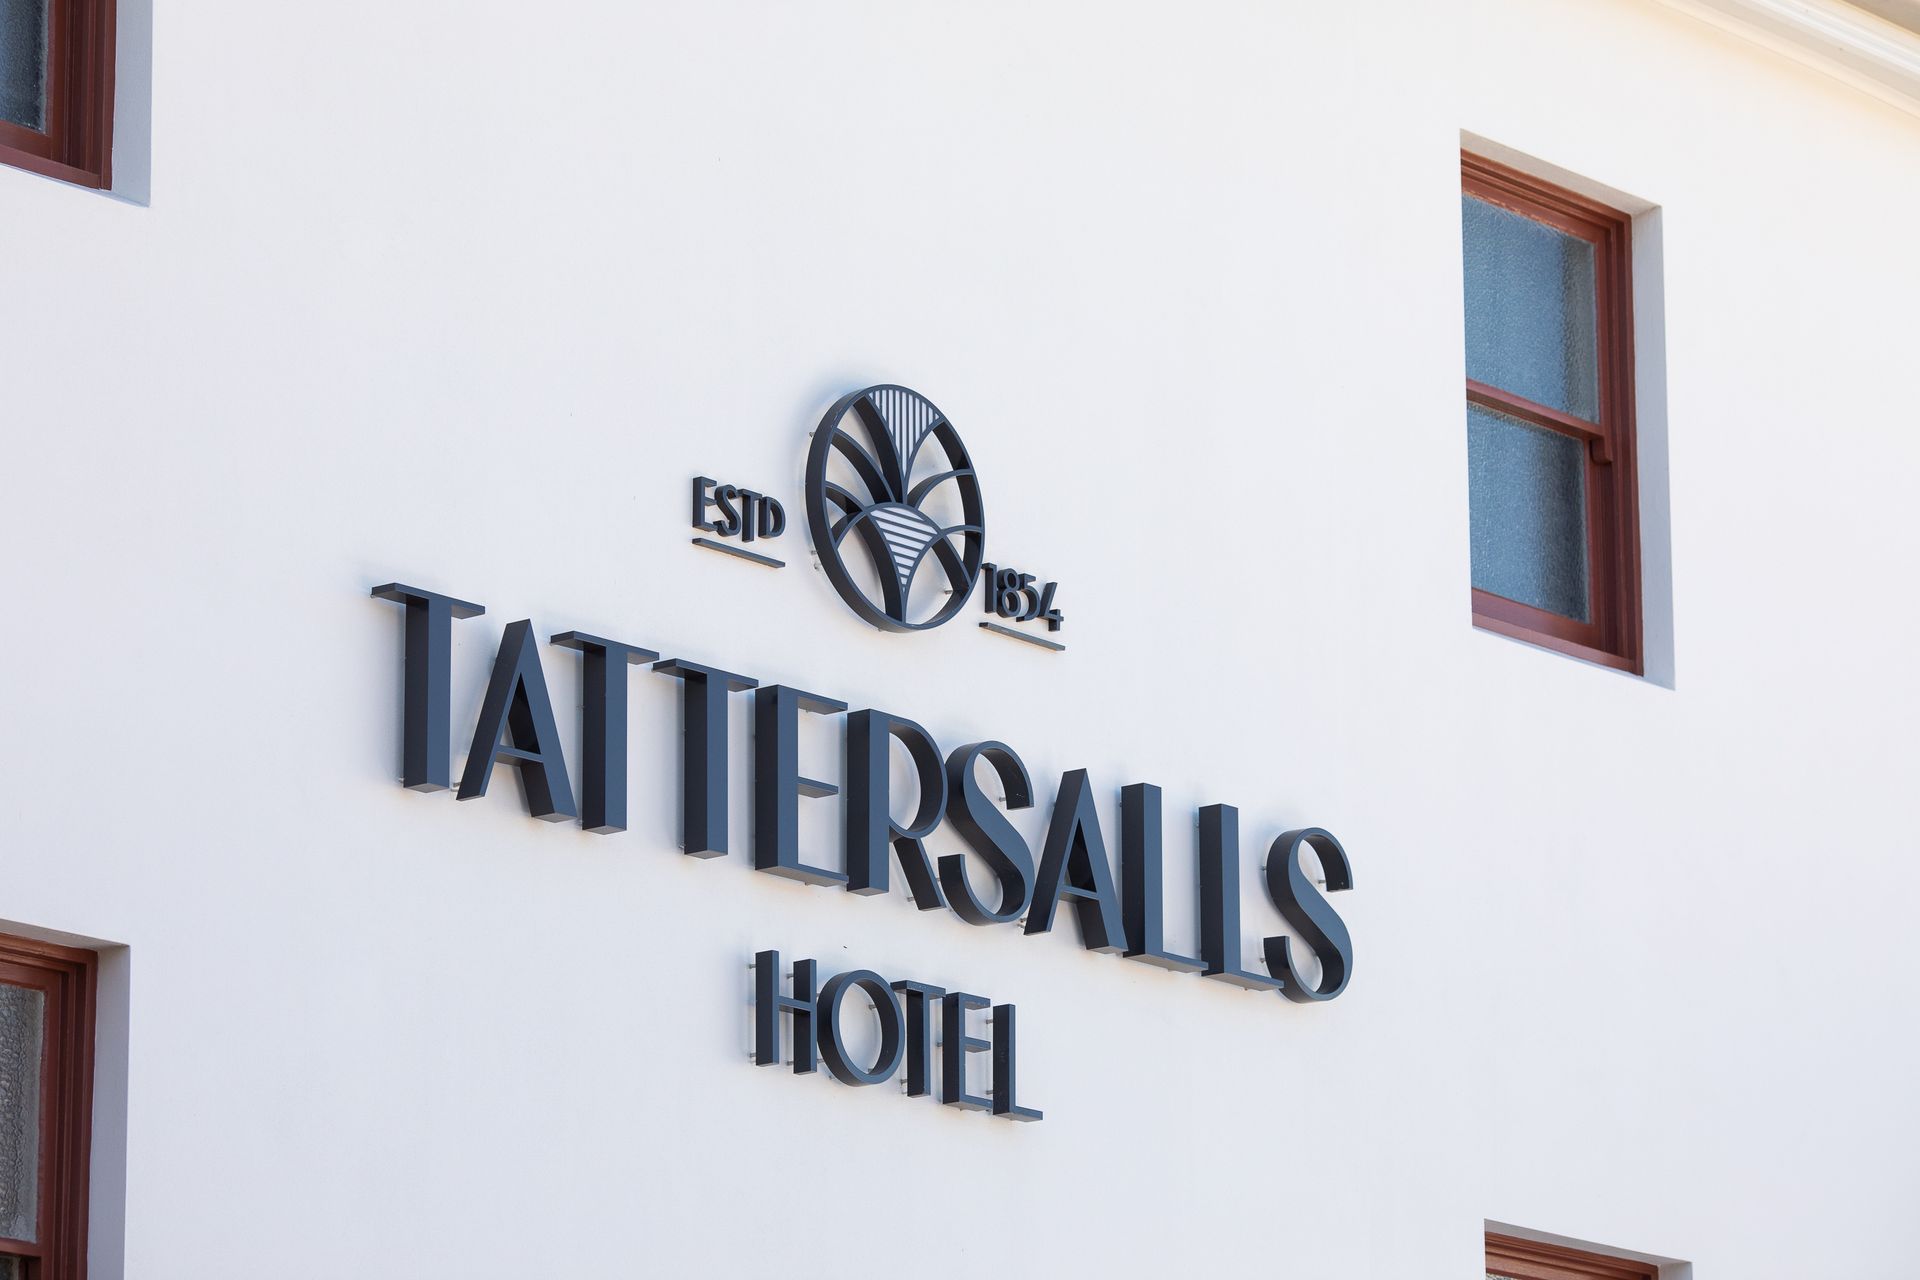 Front of tattersalls hotel with large logo on white wall